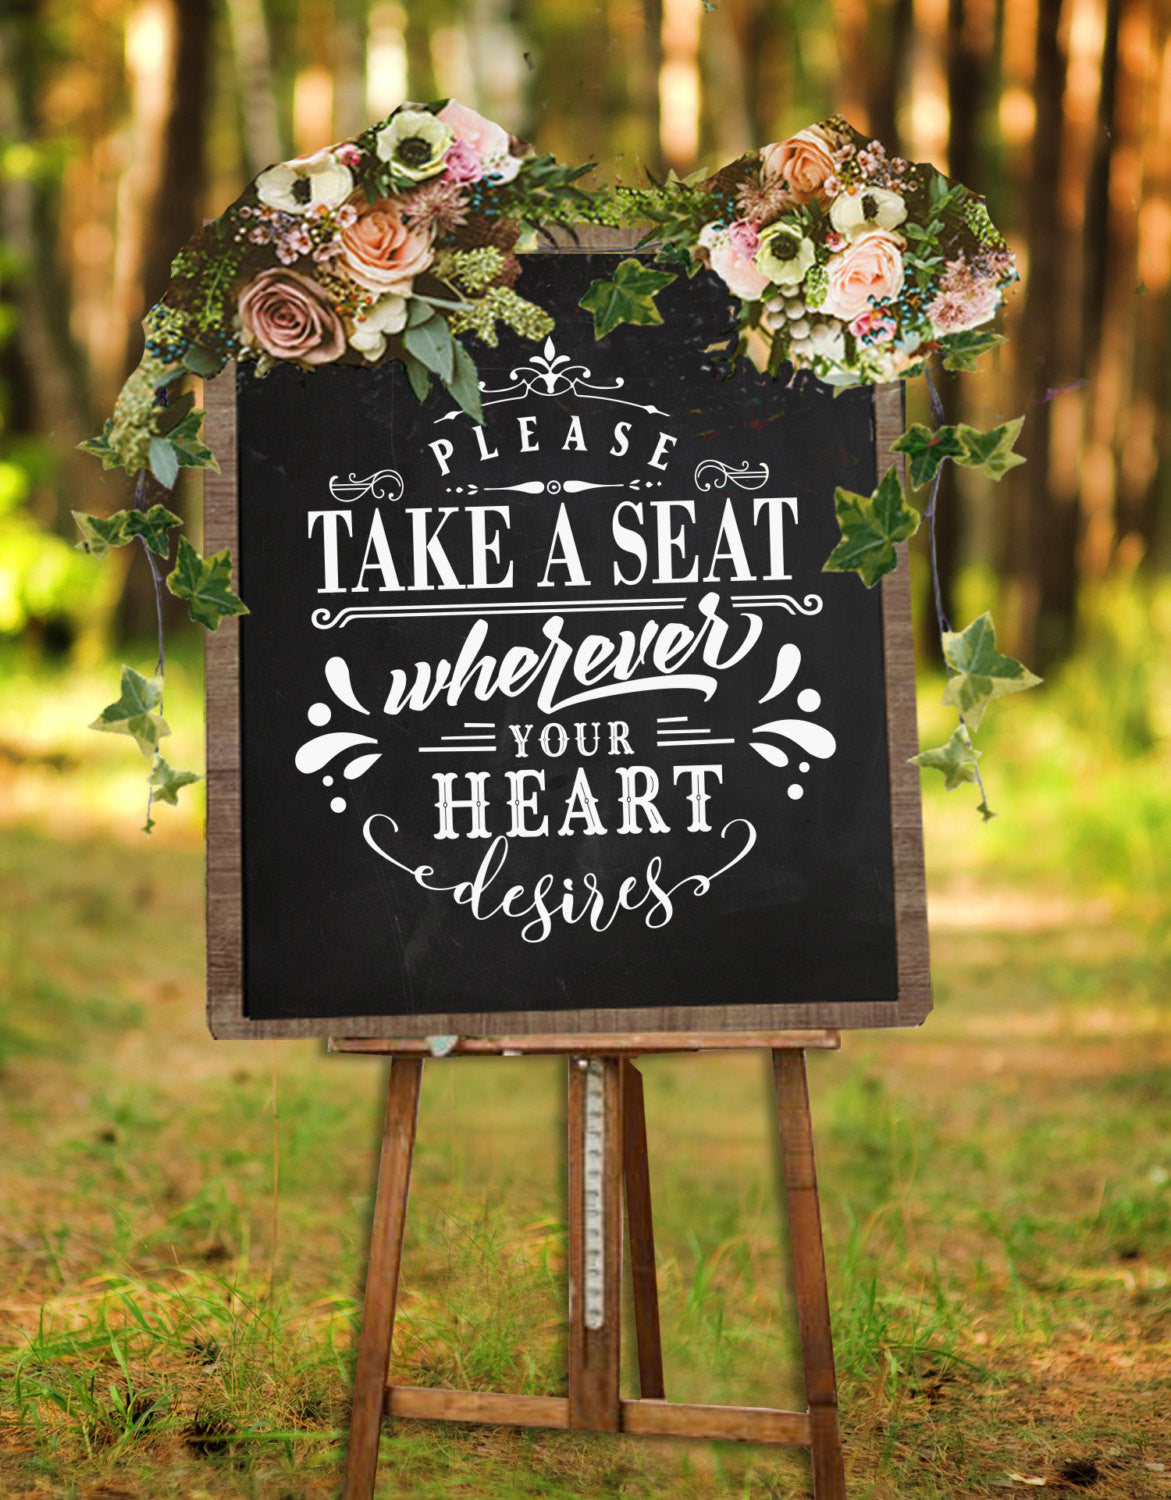 Please take a seat wherever you heart desires SVG file Cutting File Clipart in Svg, Eps, Dxf, Png for Cricut & Silhouette  svg - BlackCatsSVG